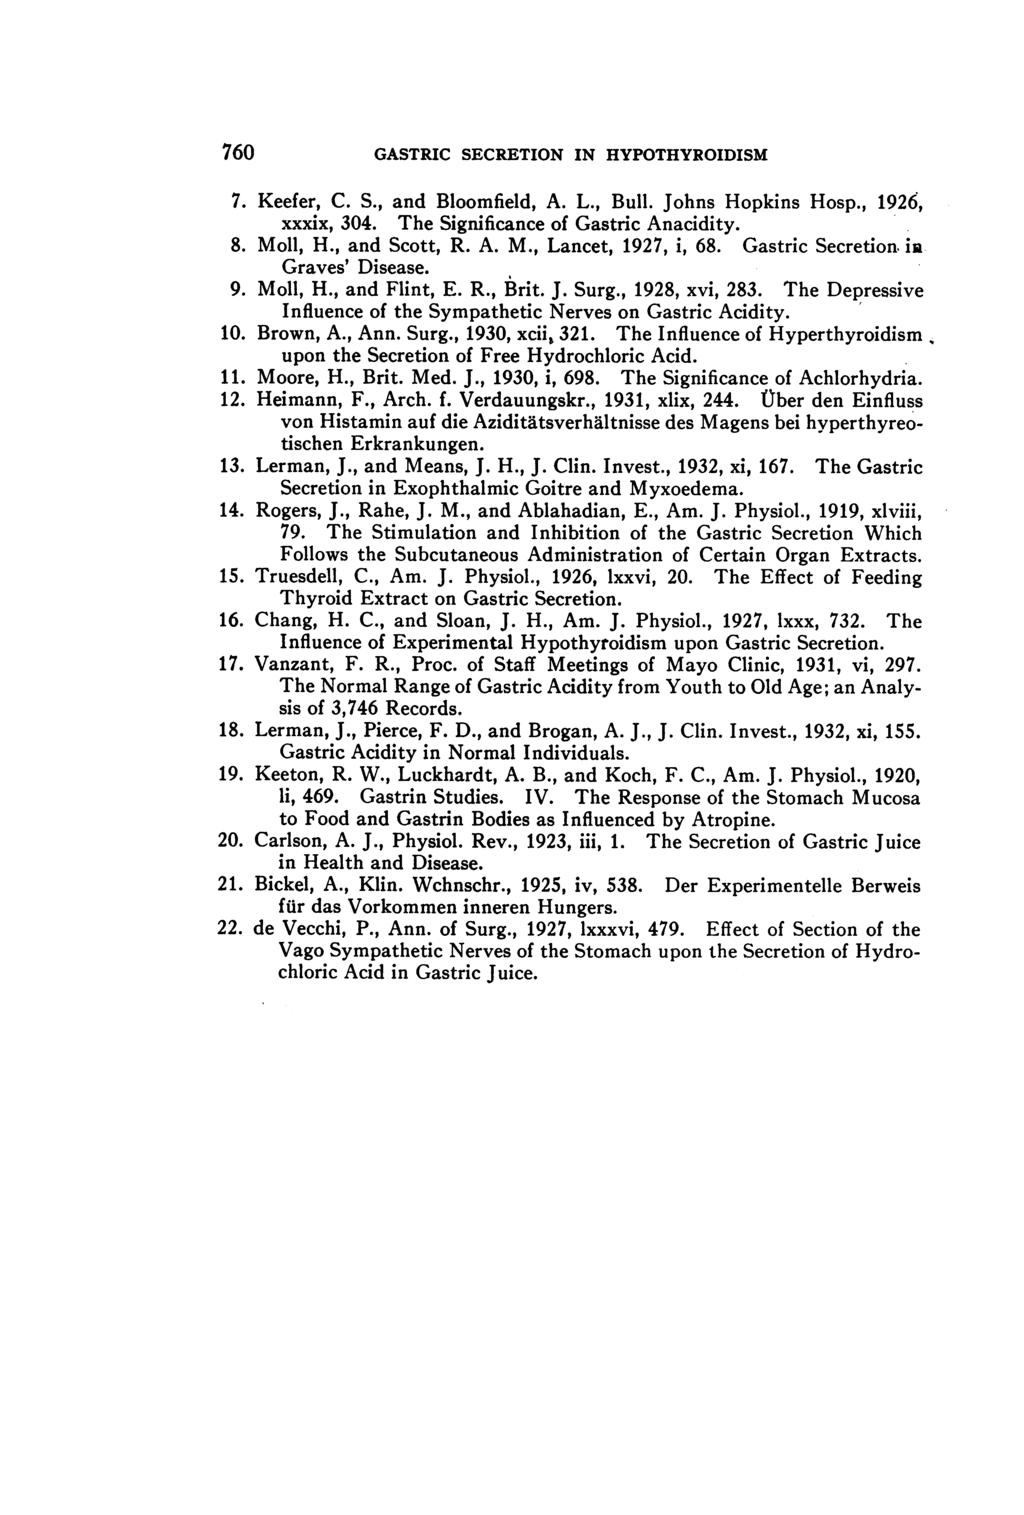 760 GASTRIC SECRETION IN HYPOTHYROIDISM 7. Keefer, C. S., and Bloomfield, A. L., Bull. Johns Hopkins Hosp., 1926, xxxix, 304. The Significance of Gastric Anacidity. 8. Moll, H., and Scott, R. A. M., Lancet, 1927, i, 68.